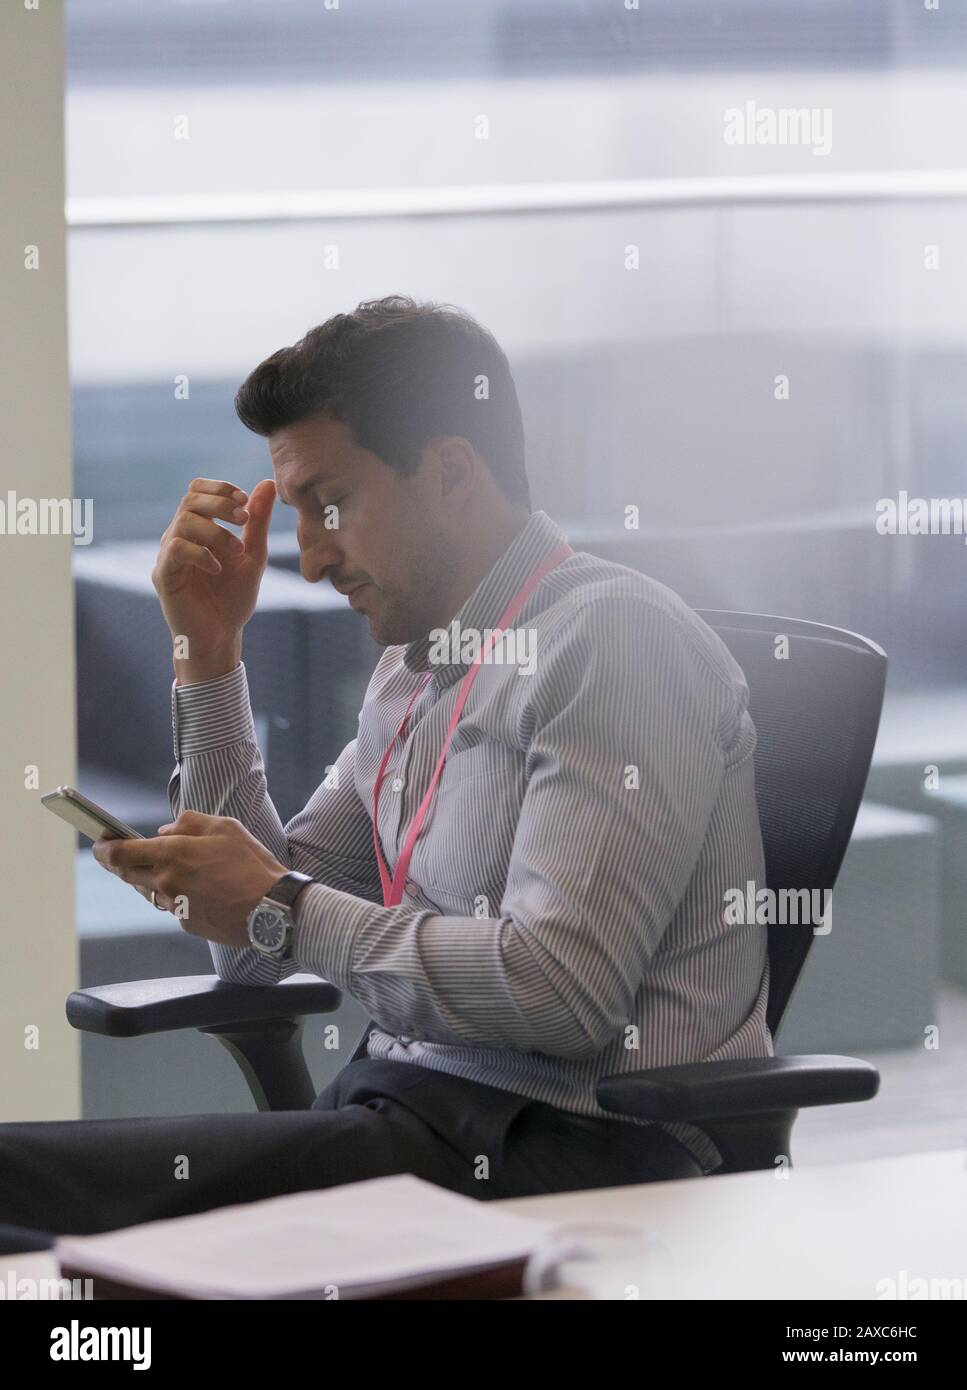 Businessman using smart phone in office Banque D'Images